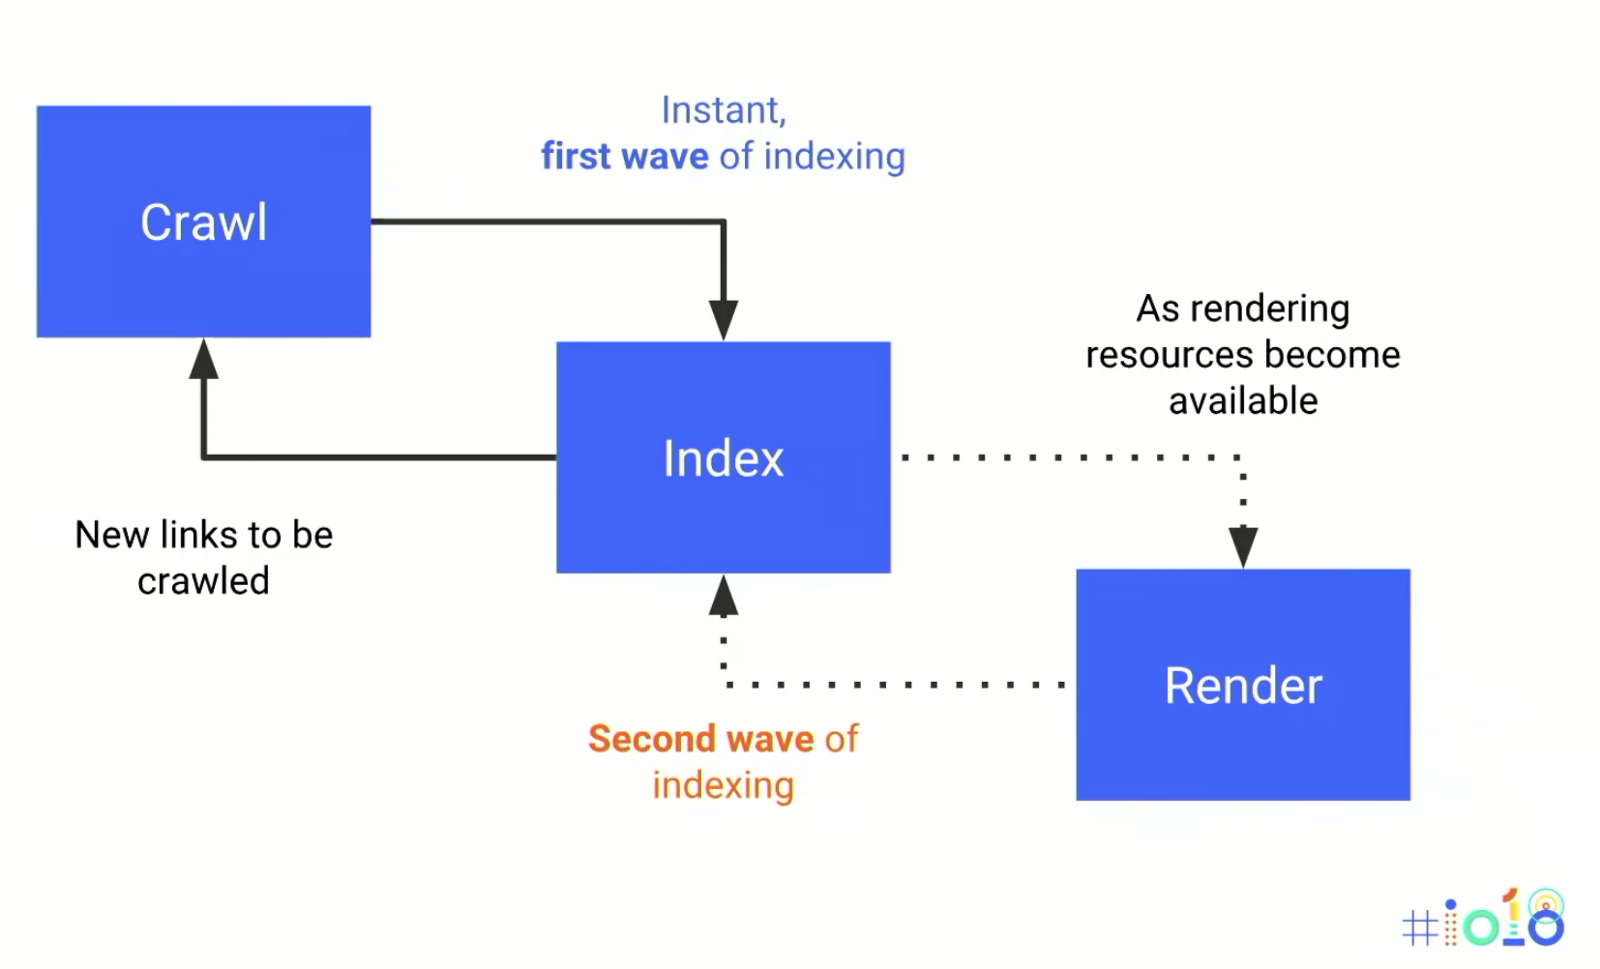 Second wave of indexing